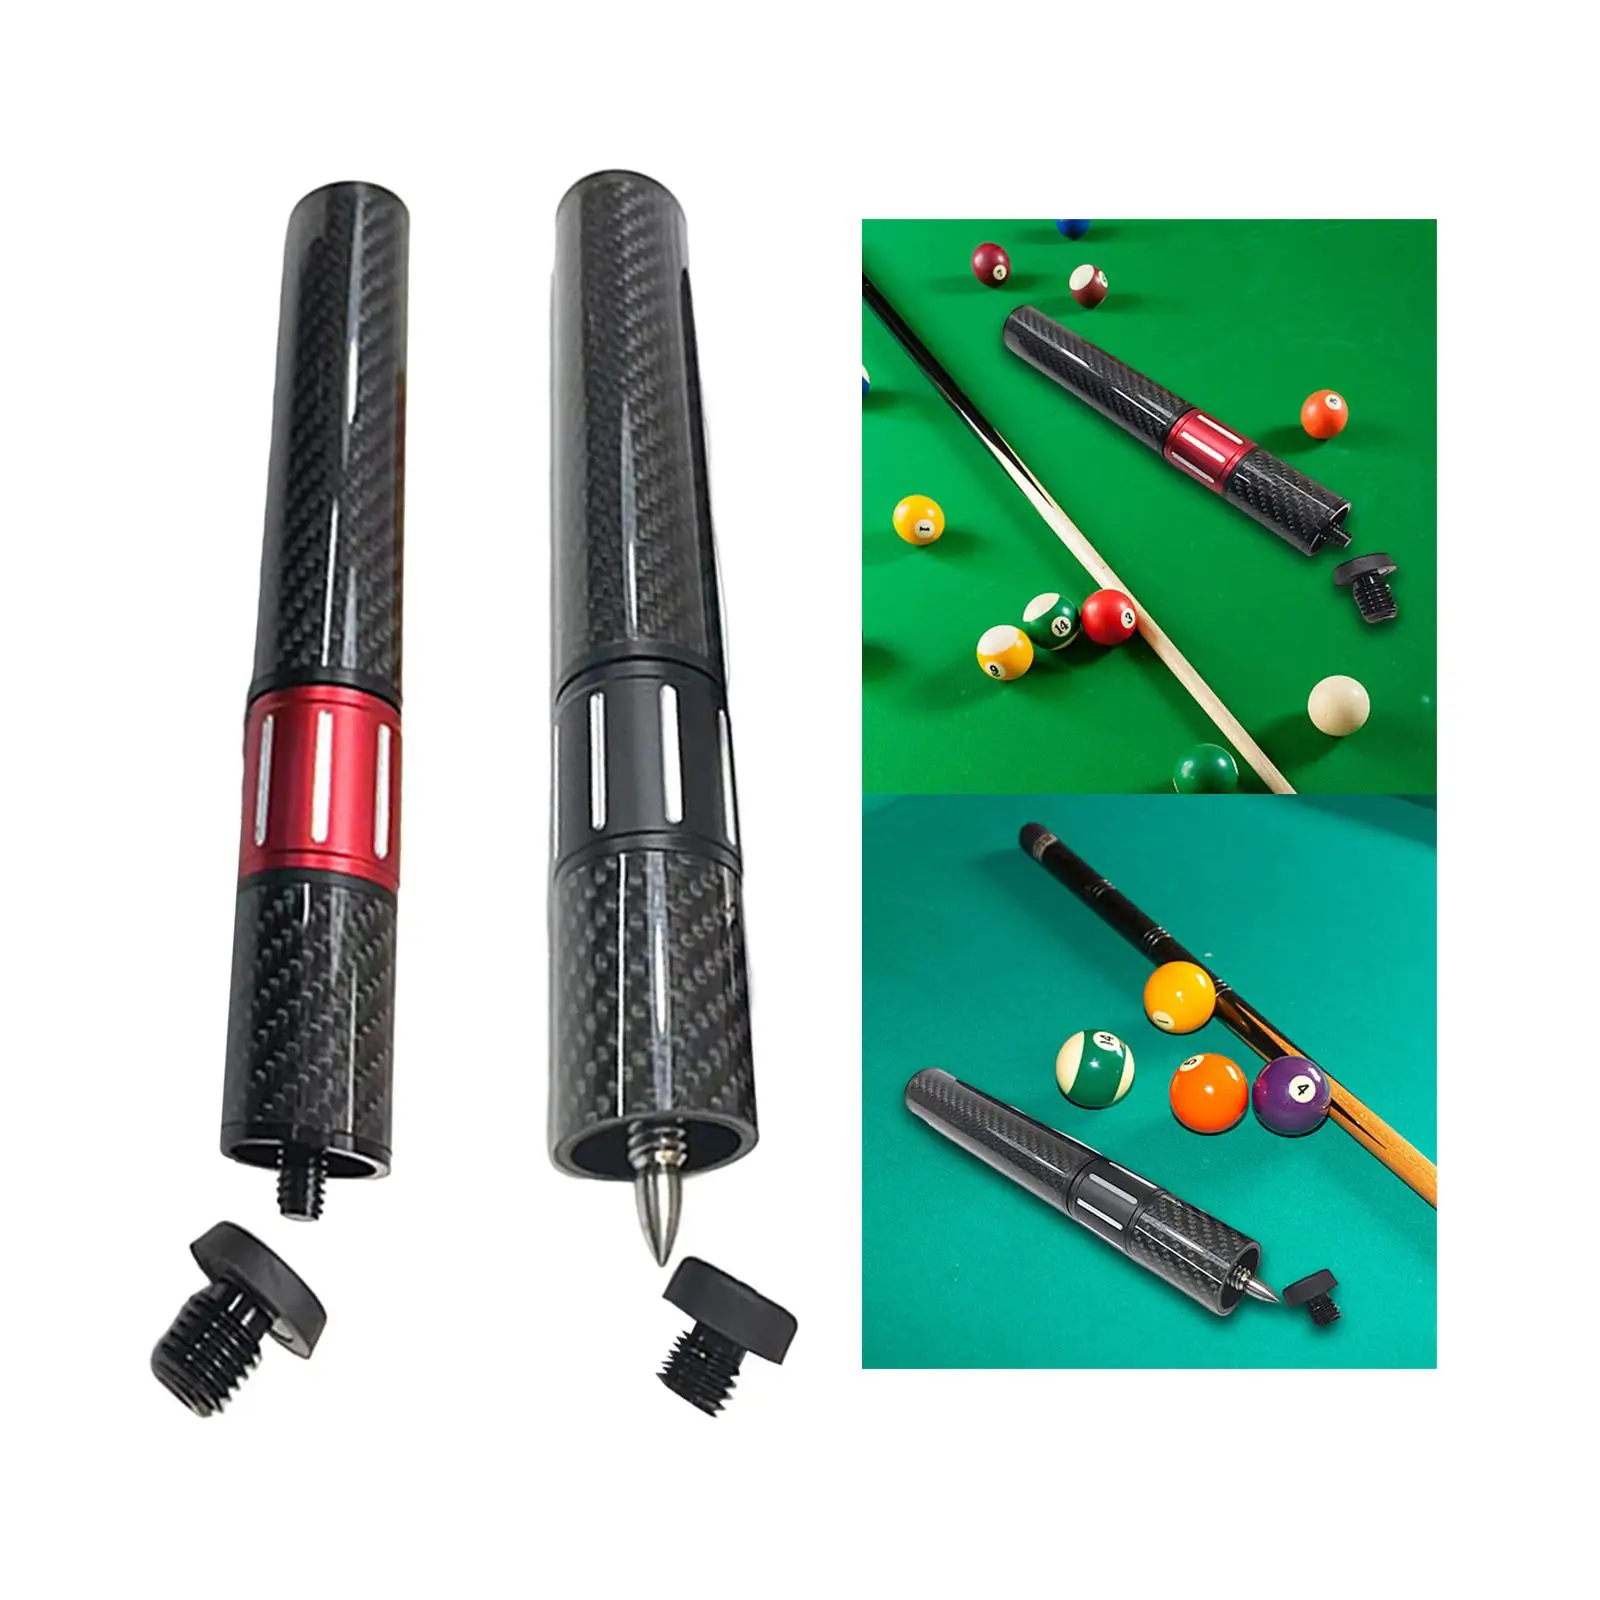 Snooker Cue Extend Lightweight Telescopic Pool Cue Extension Weights Replacement for Billiard Cues Beginners Professional